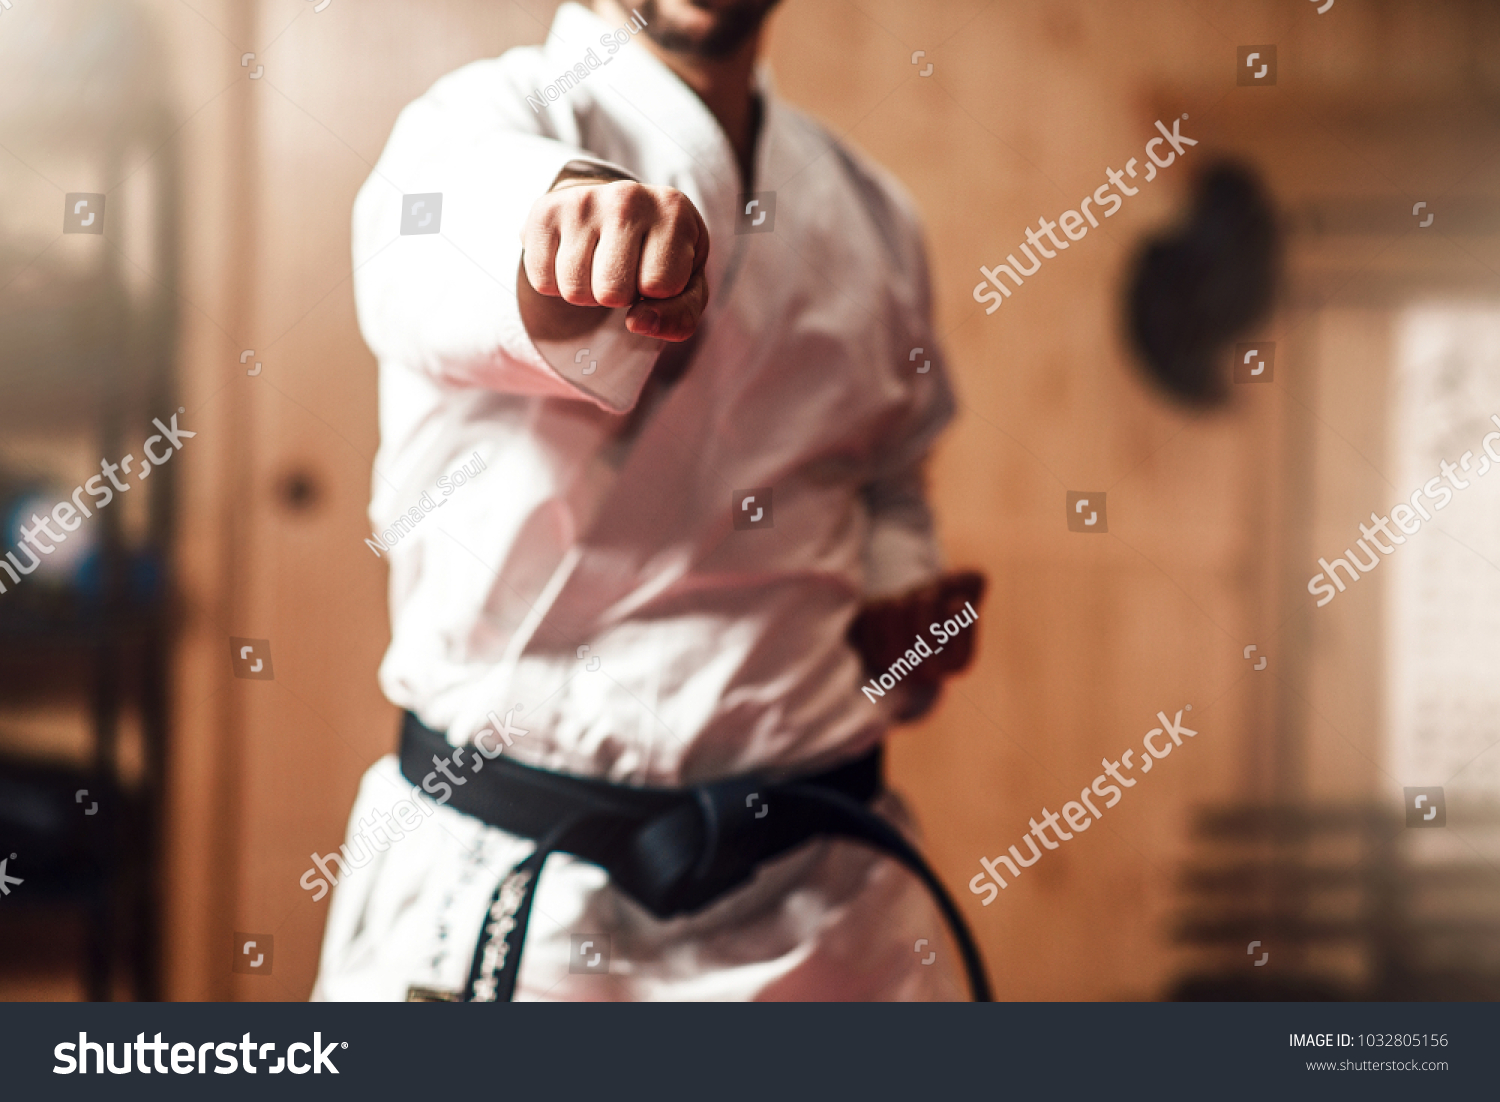 Martial arts master on fight training in gym #1032805156